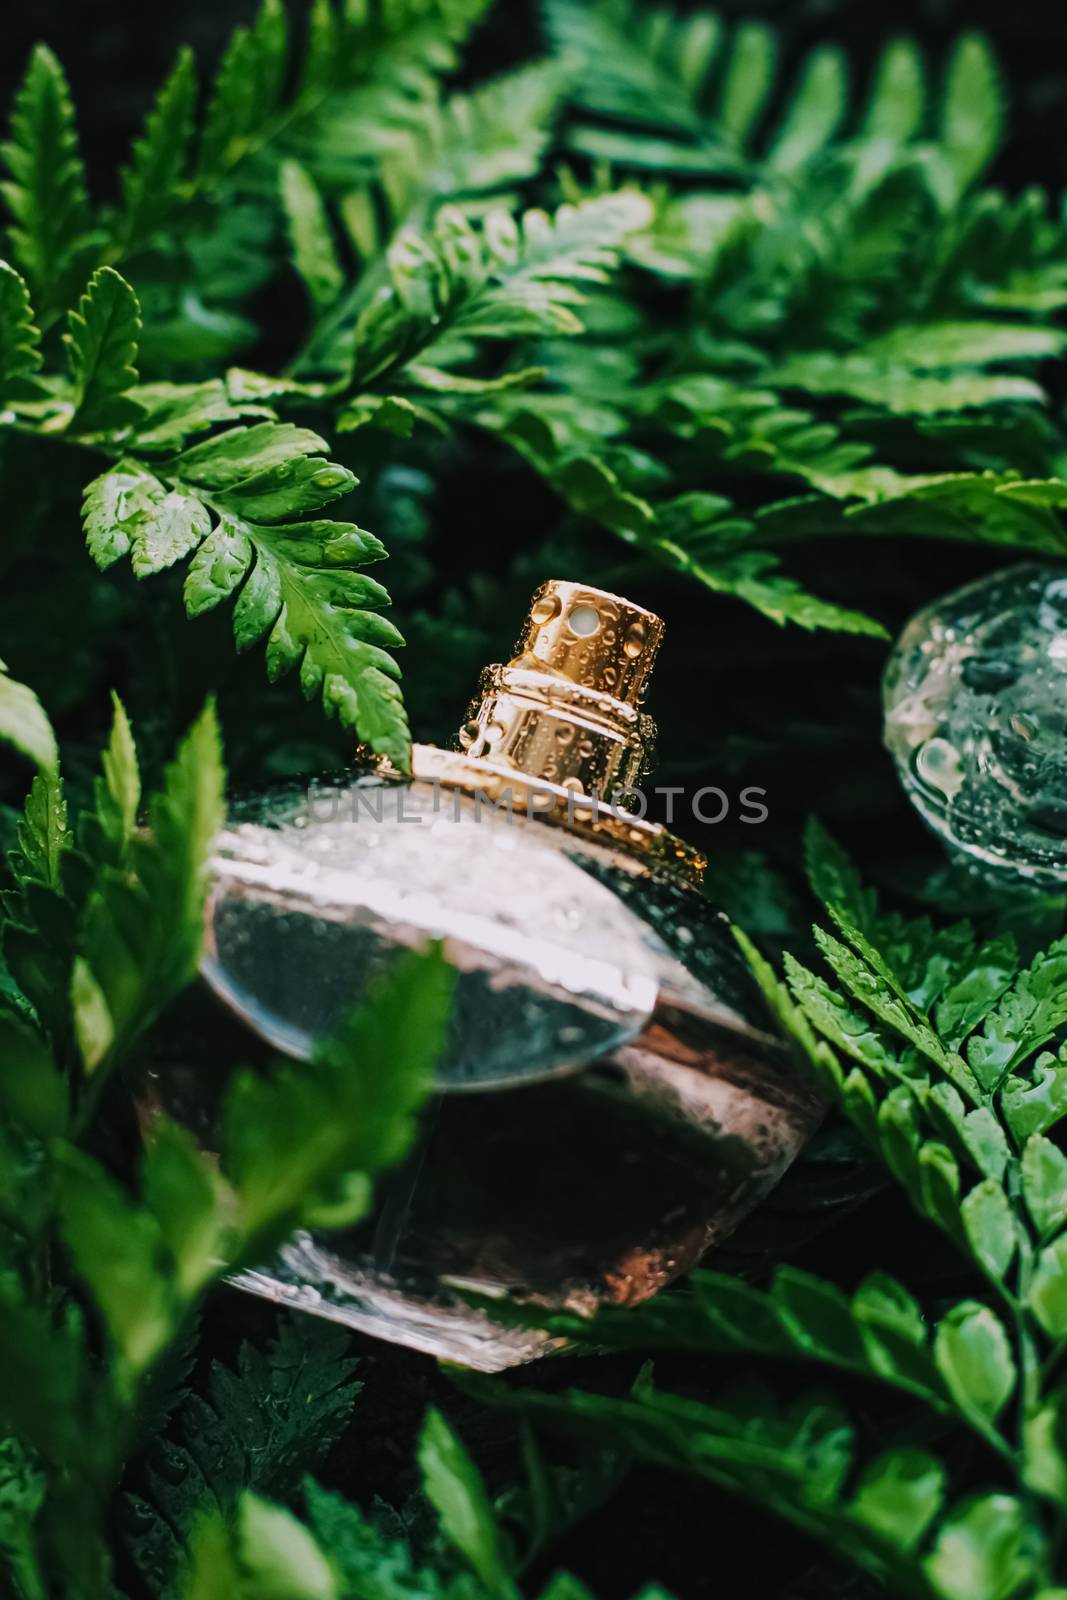 Perfume bottle with aromatic tropical scent in nature, luxury summer fragrance